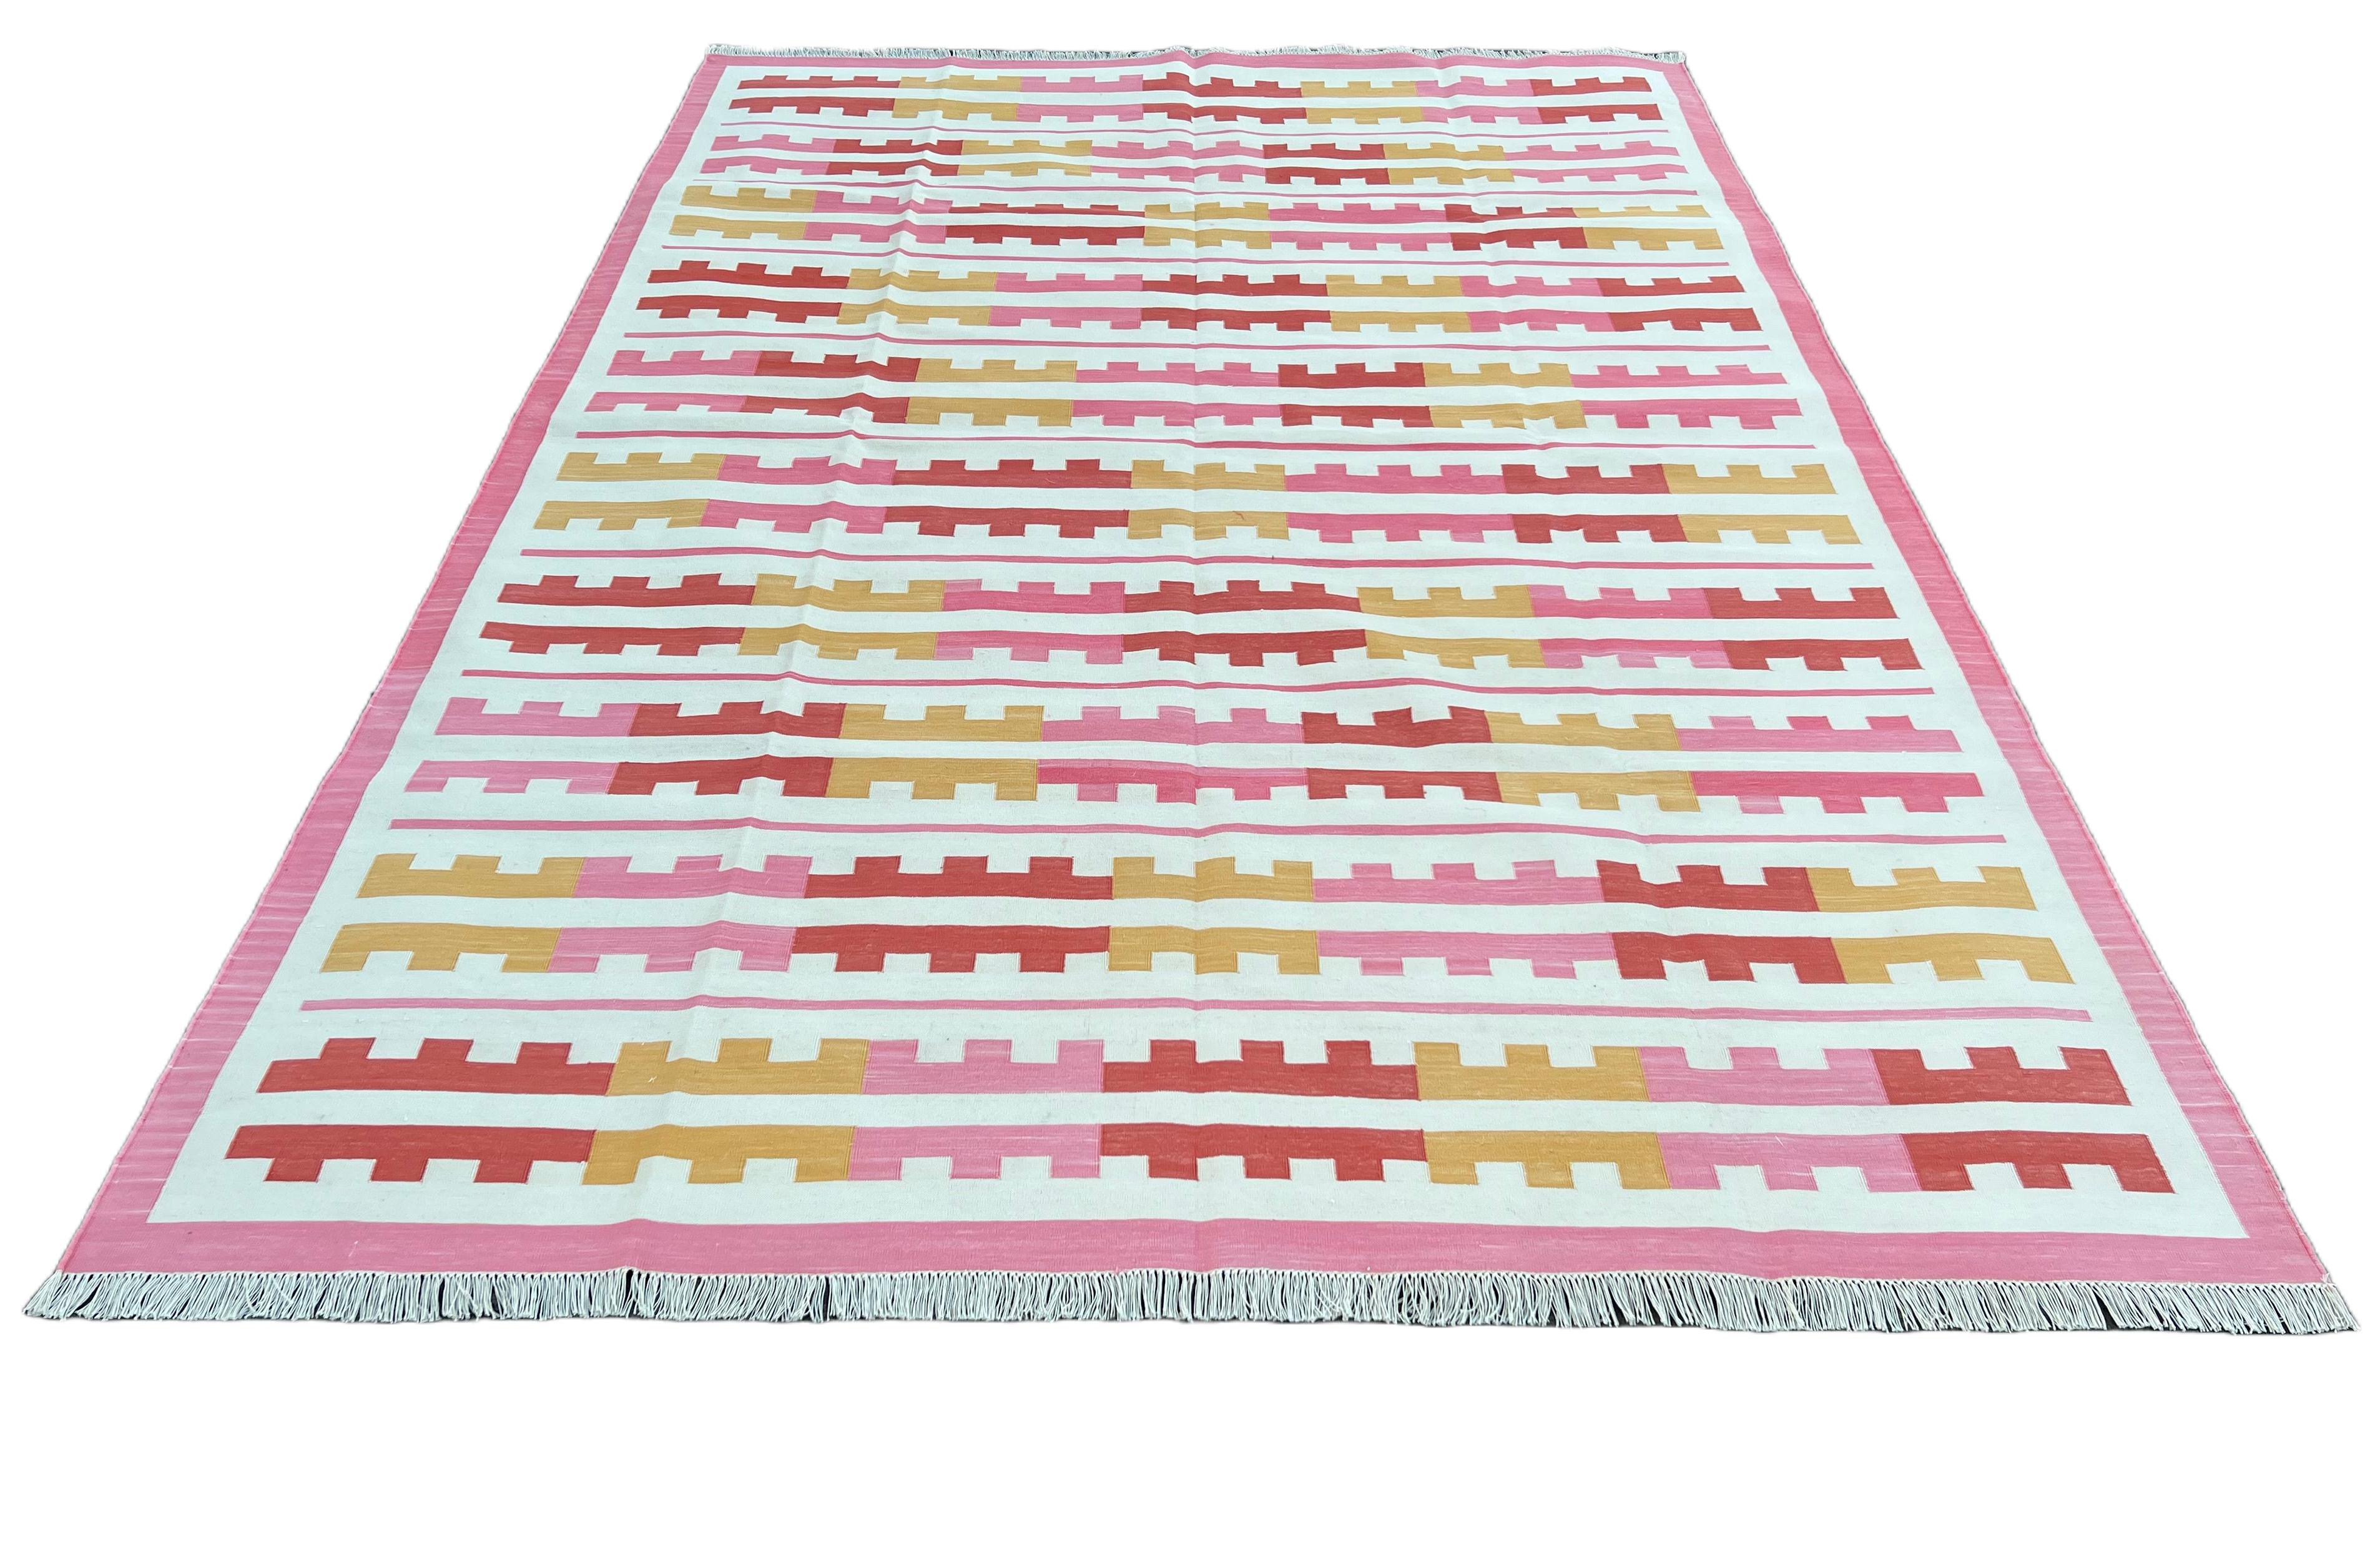 Contemporary Handmade Cotton Area Flat Weave Rug, 6x9 Pink And Yellow Striped Indian Dhurrie For Sale